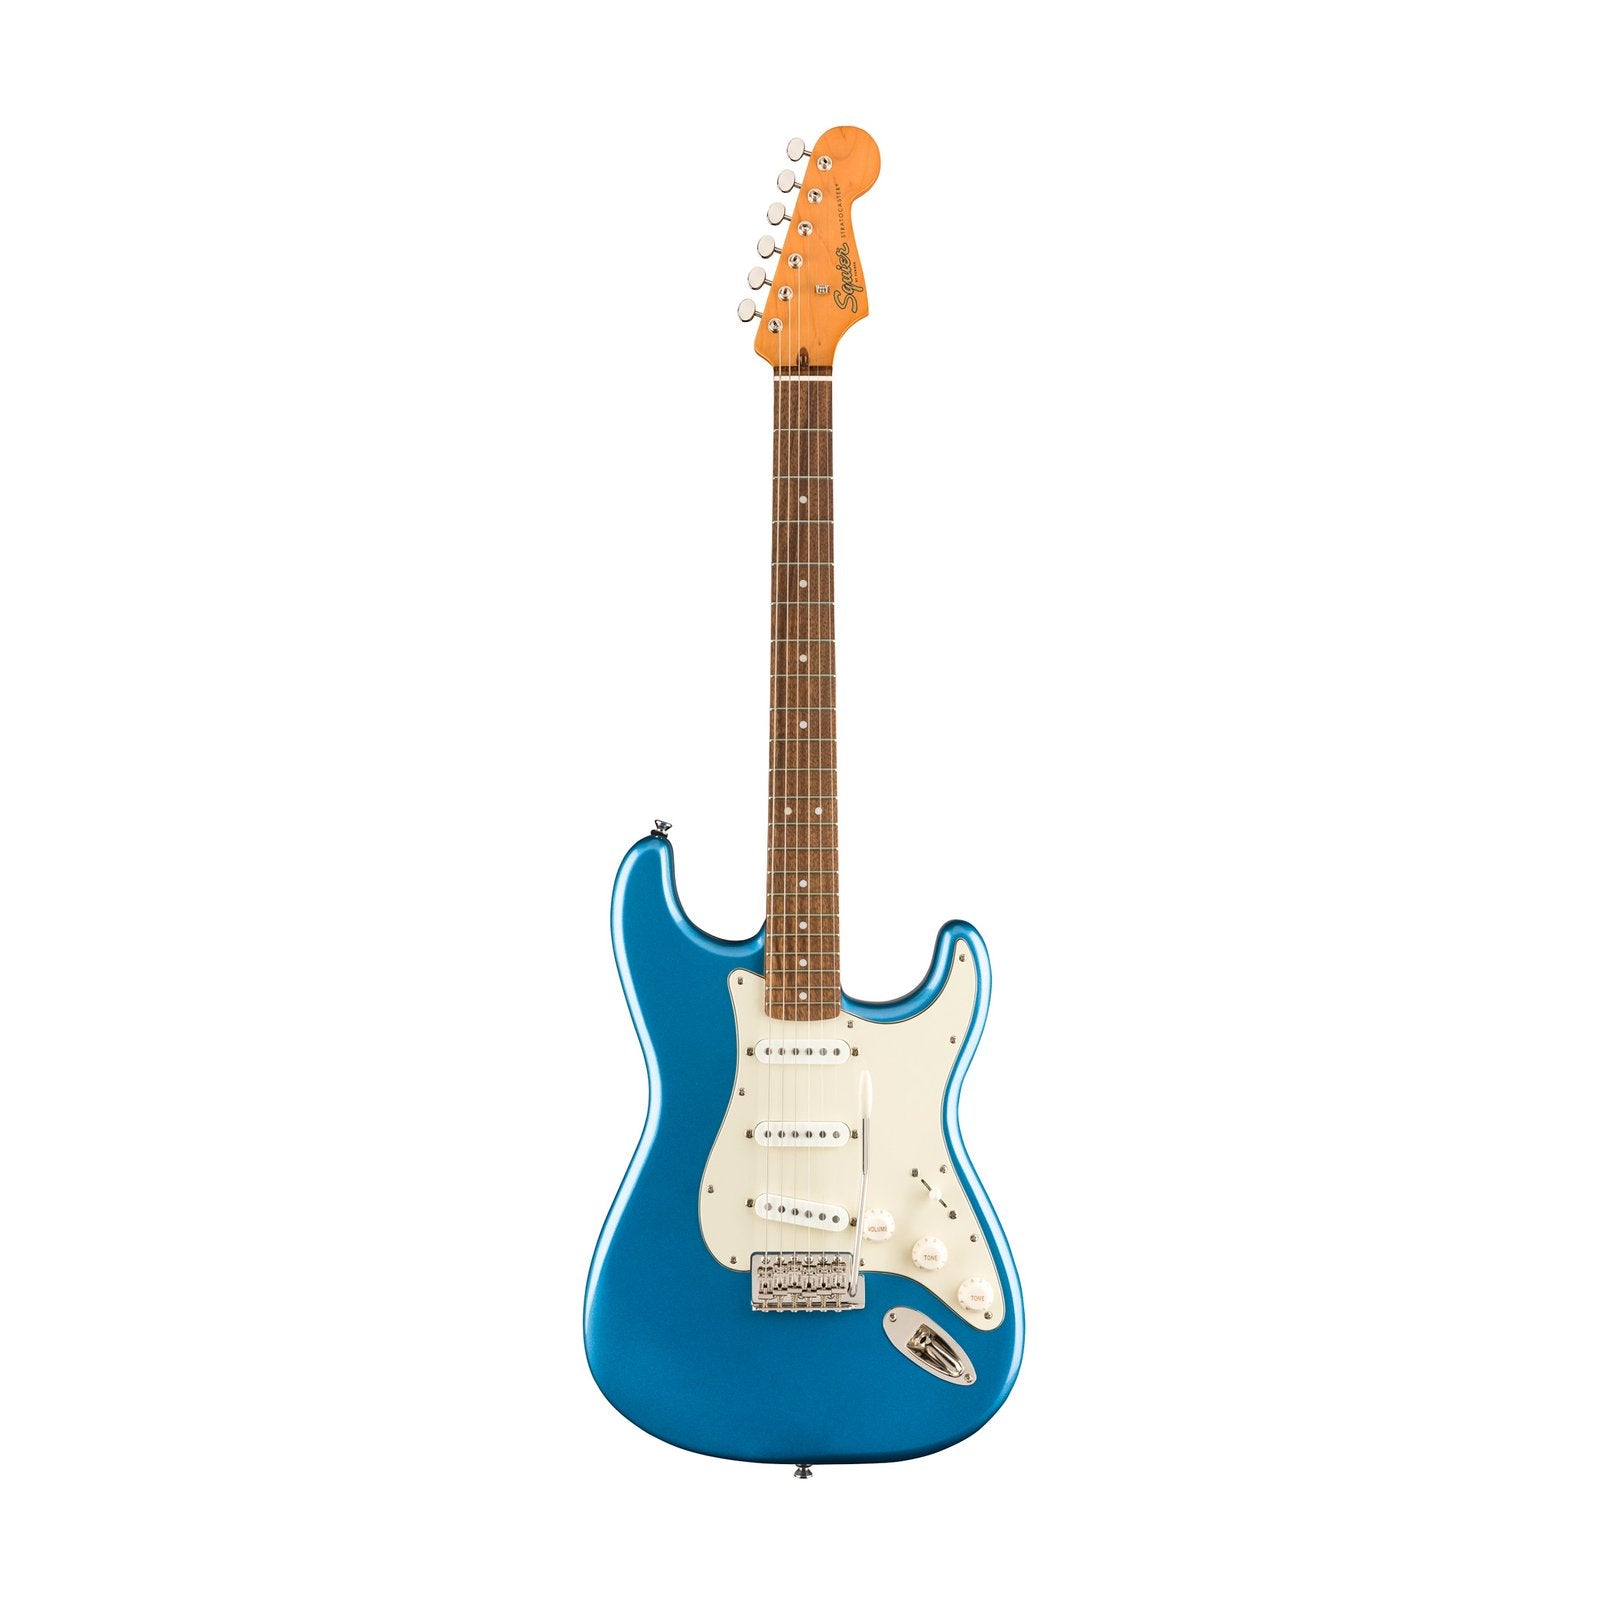 Squier Classic Vibe 60s Stratocaster Electric Guitar, Laurel FB, Lake Placid Blue, SQUIER BY FENDER, ELECTRIC GUITAR, squier-by-fender-electric-guitar-037-4010-502, ZOSO MUSIC SDN BHD